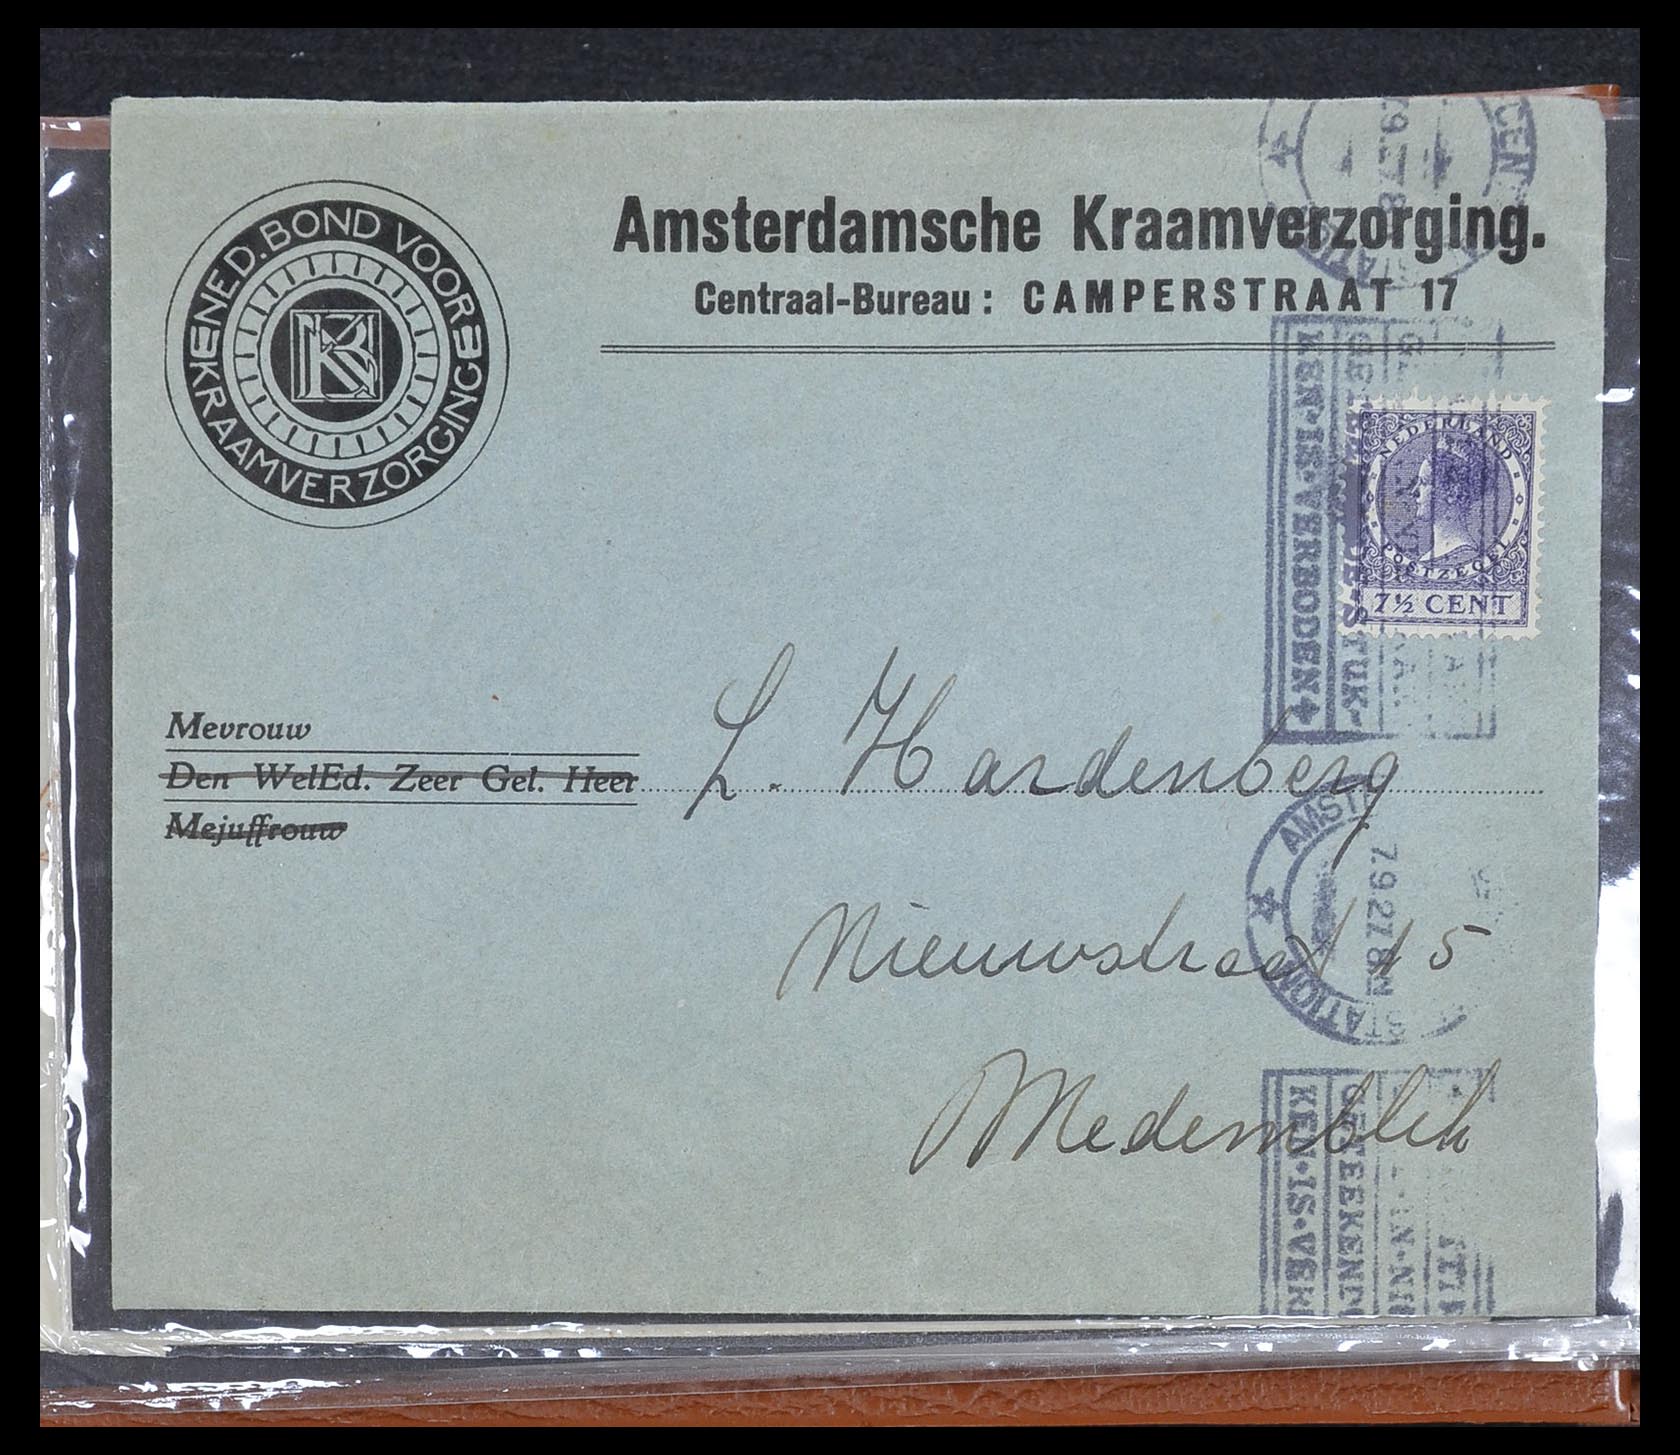 33344 040 - Stamp collection 33344 Netherlands covers and cards 1850-1950.